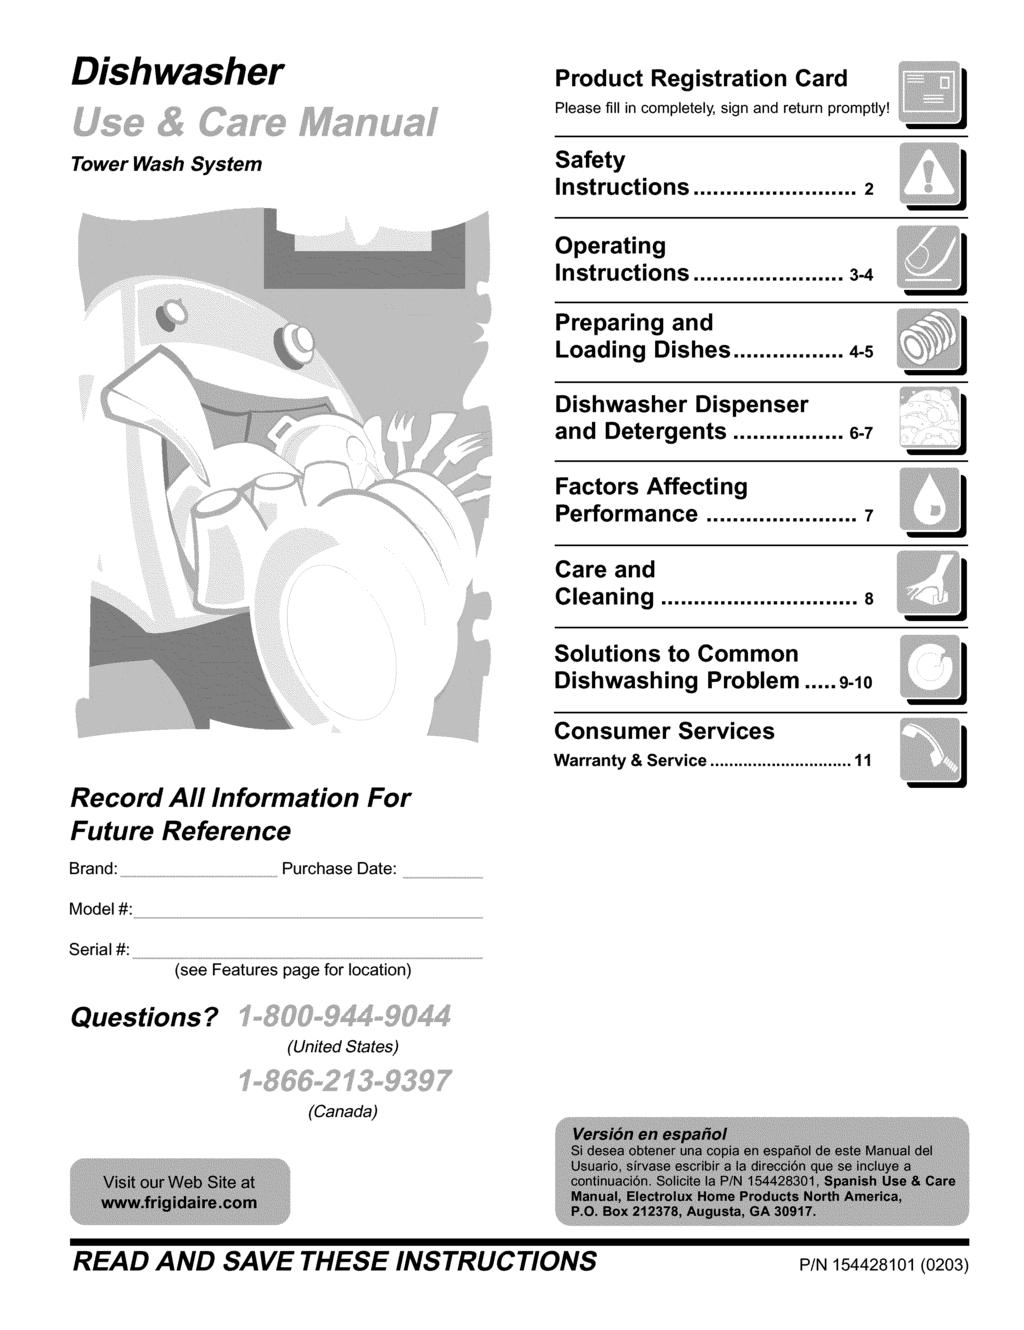 Dishwasher Product Registration Card Please fill in completely, sign and return promptly! Tower Wash System Safety Instructions... 2 Operating Instructions... 3-4 Preparing and Loading Dishes.